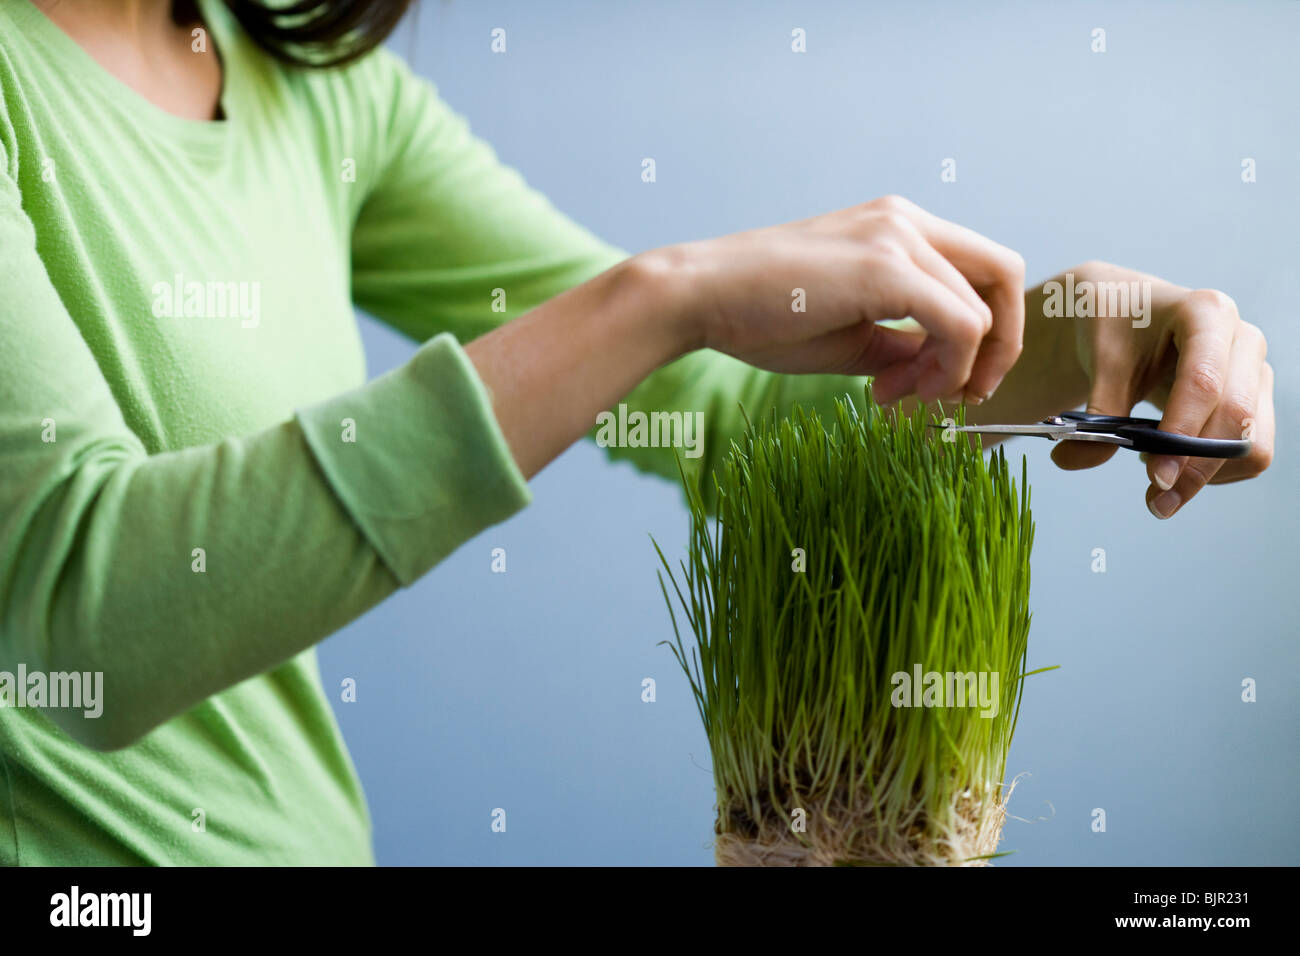 Woman trimming grass with scissors. Stock Photo